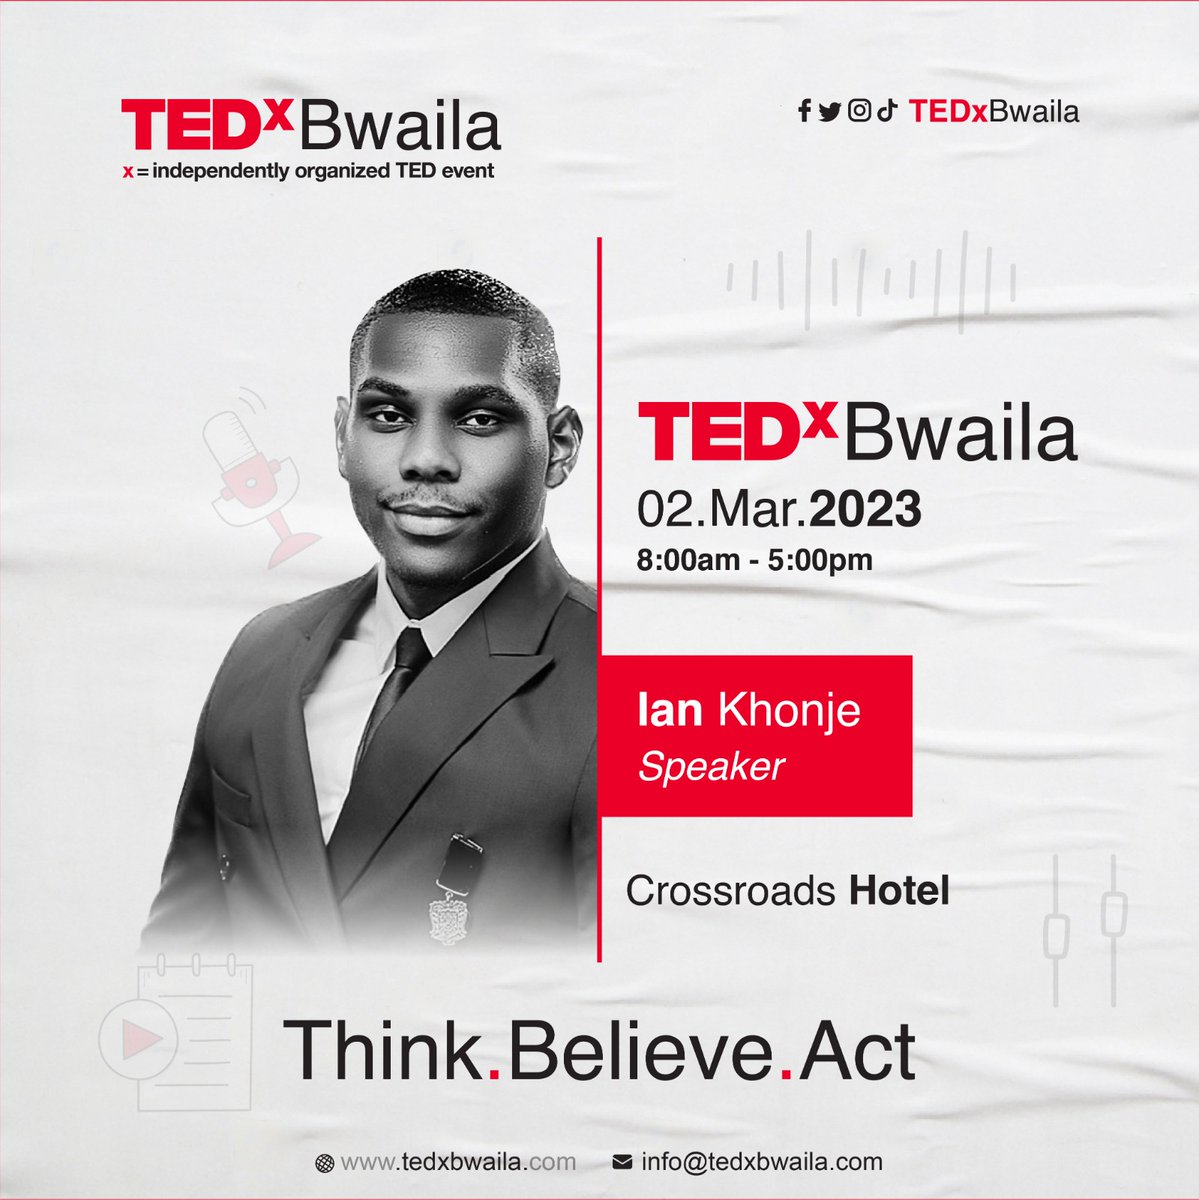 Introducing Ian Khonje! Ian is an entrepreneur and founder of Oasis Brands, a creative digital transformation company and IK Foods, an innovative and sustainable food processing company.  #TEDxspeaker #Speakers #ThinkBelieveAct #TEDxBwaila #TEDx #UNDP #Thenationonline #USembassy